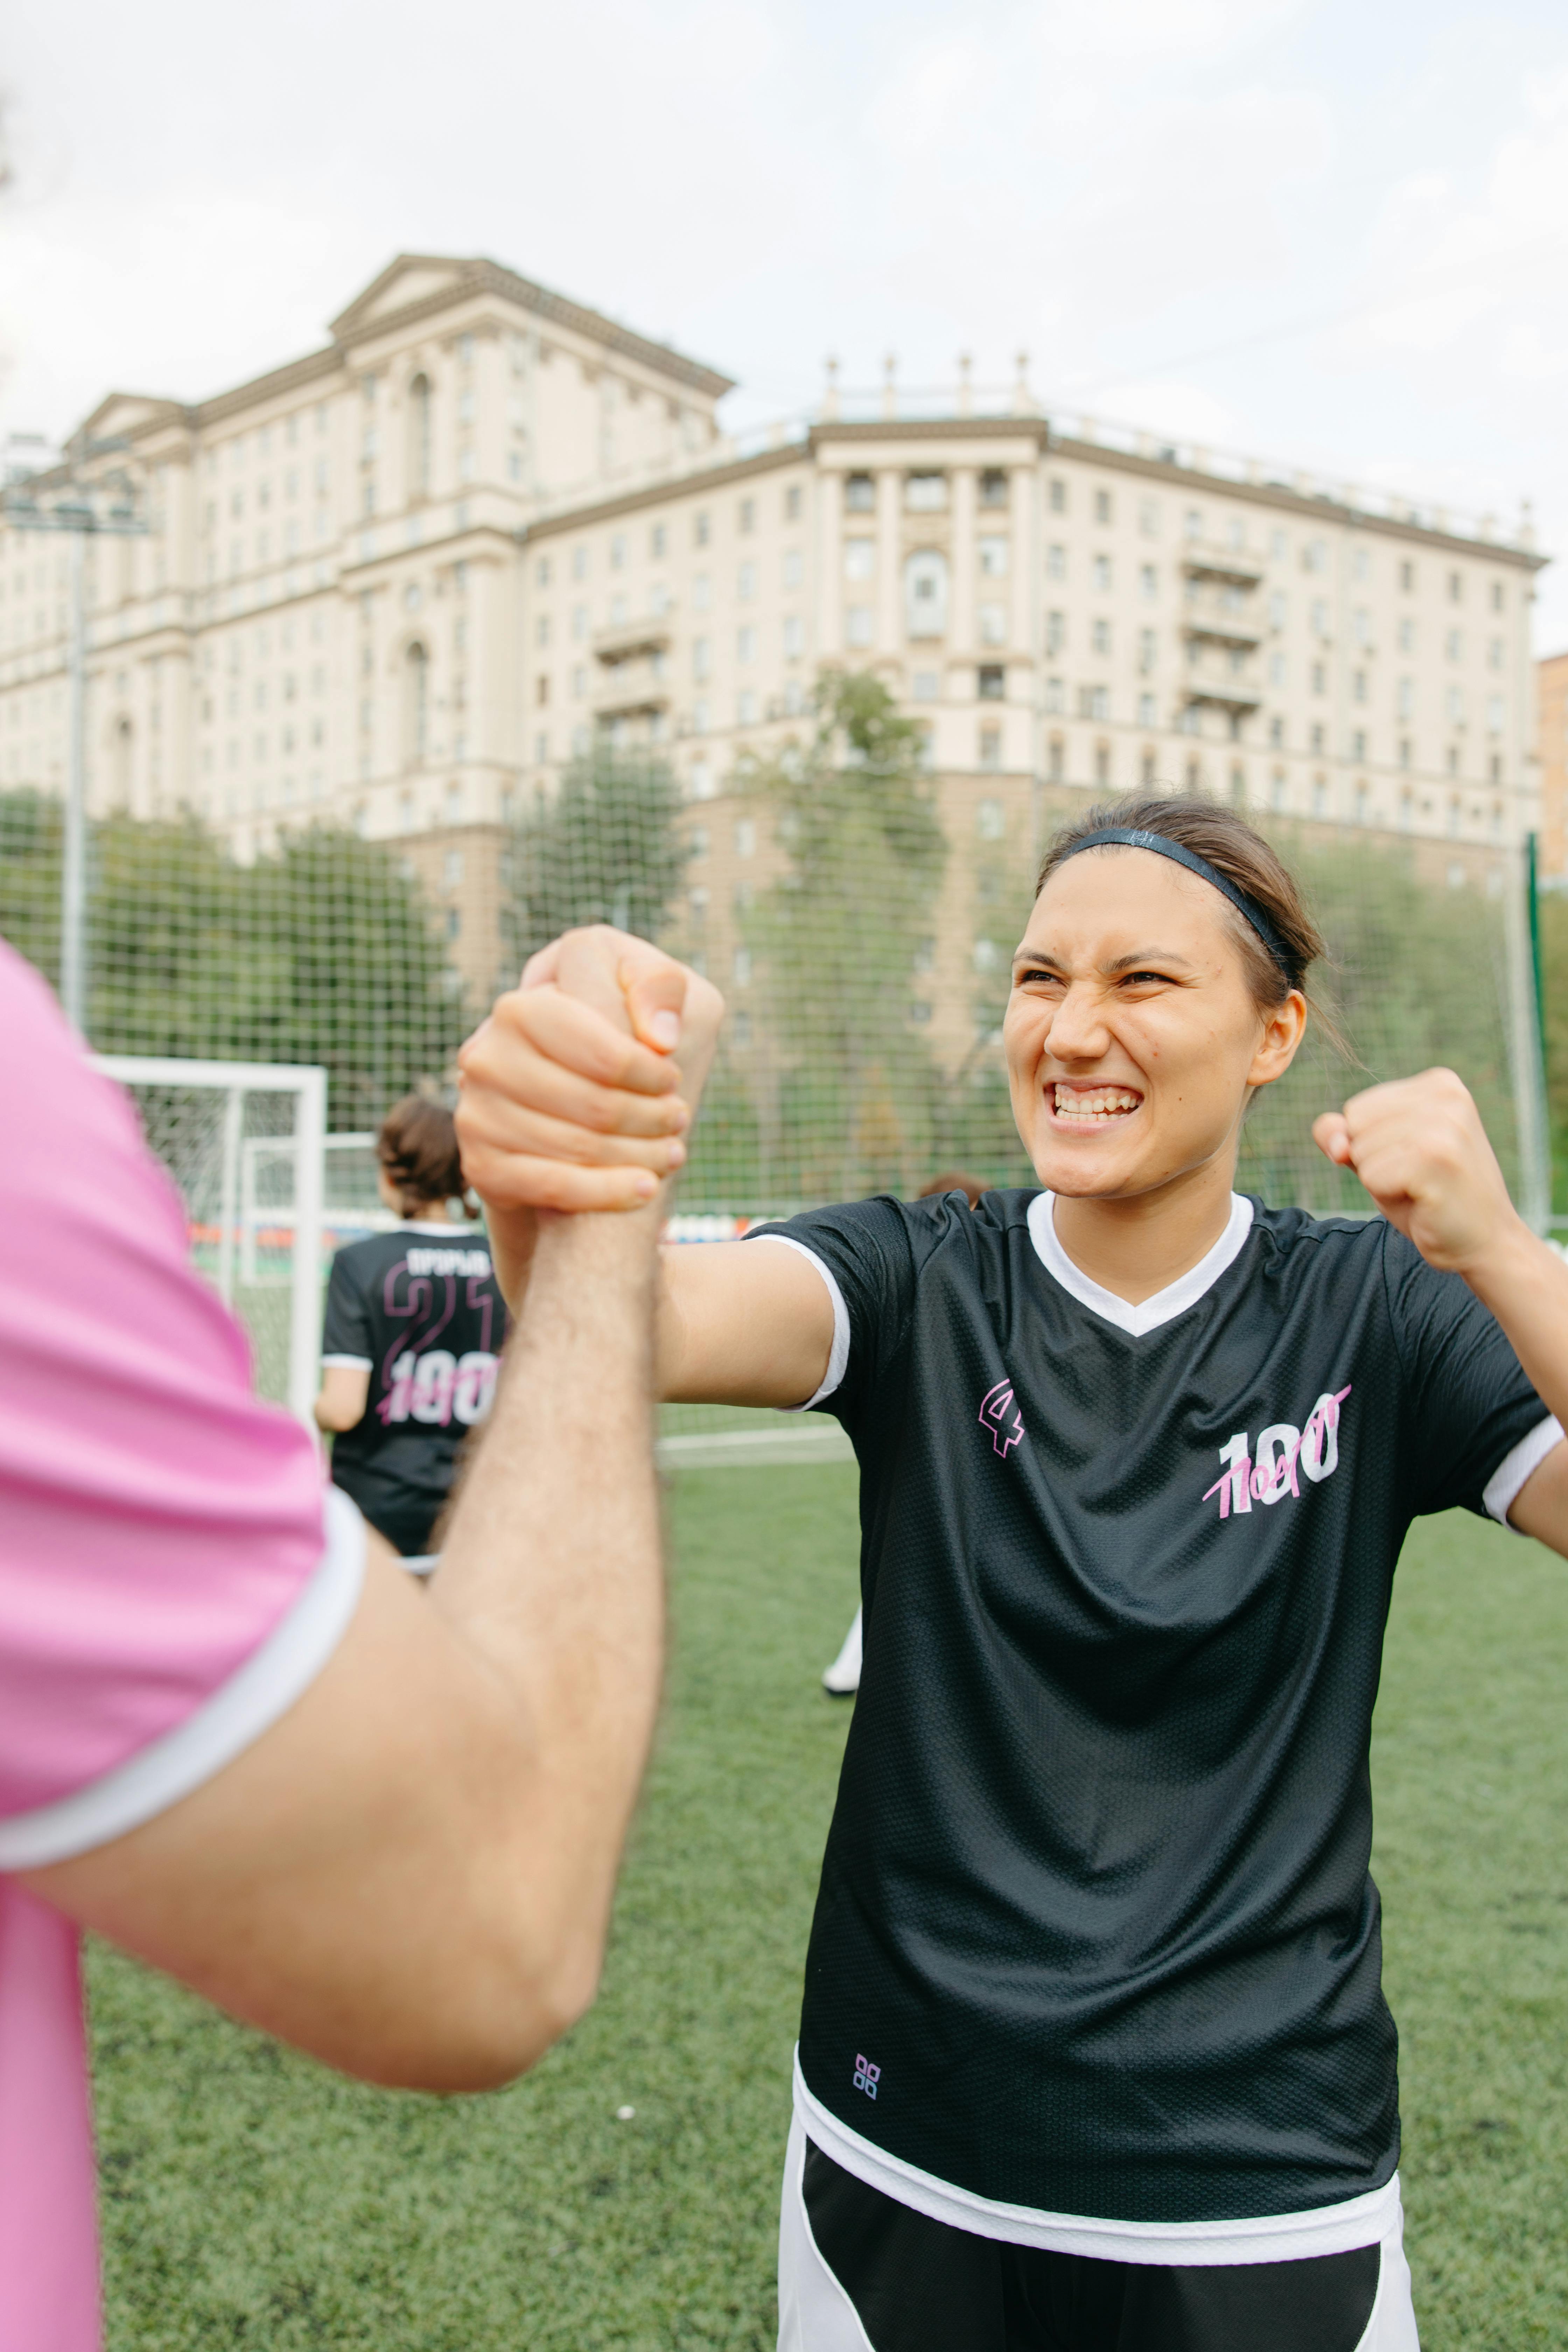 woman in black jersey shirt smiling with success